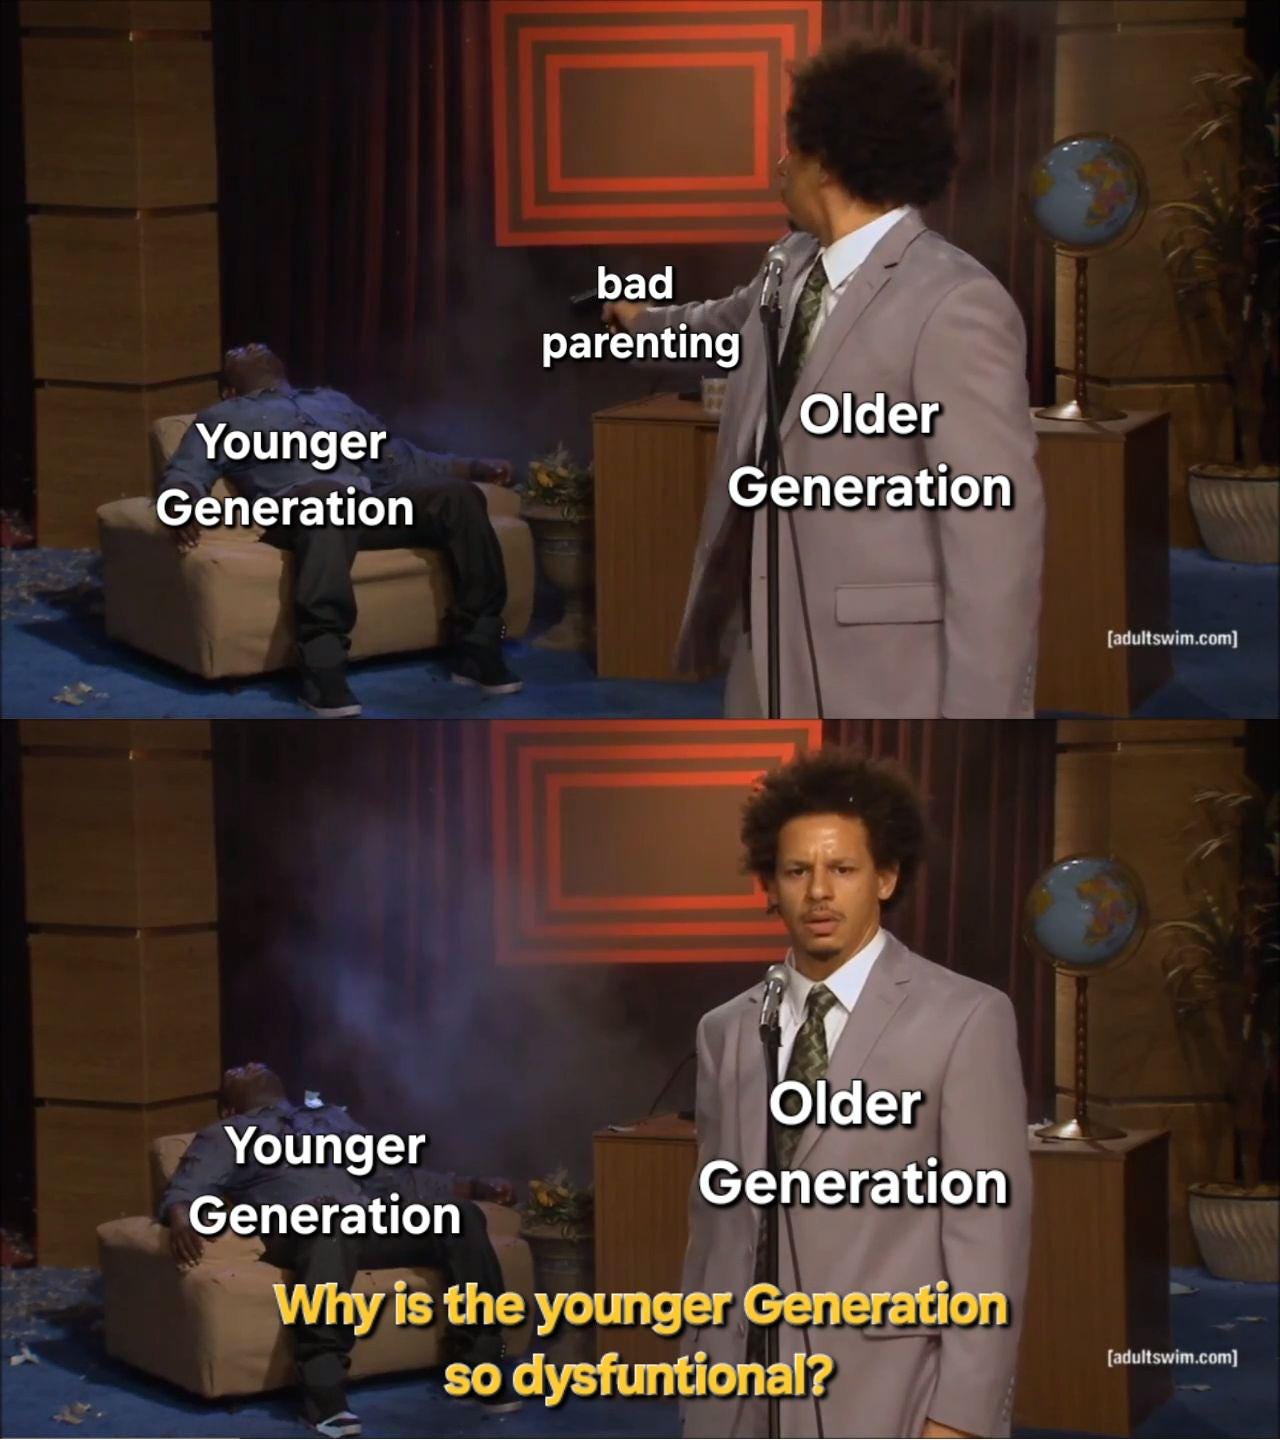 https://www.reddit.com/r/memes/comments/1ccyysb/remember_whose_job_it_was_to_raise_the_younger/